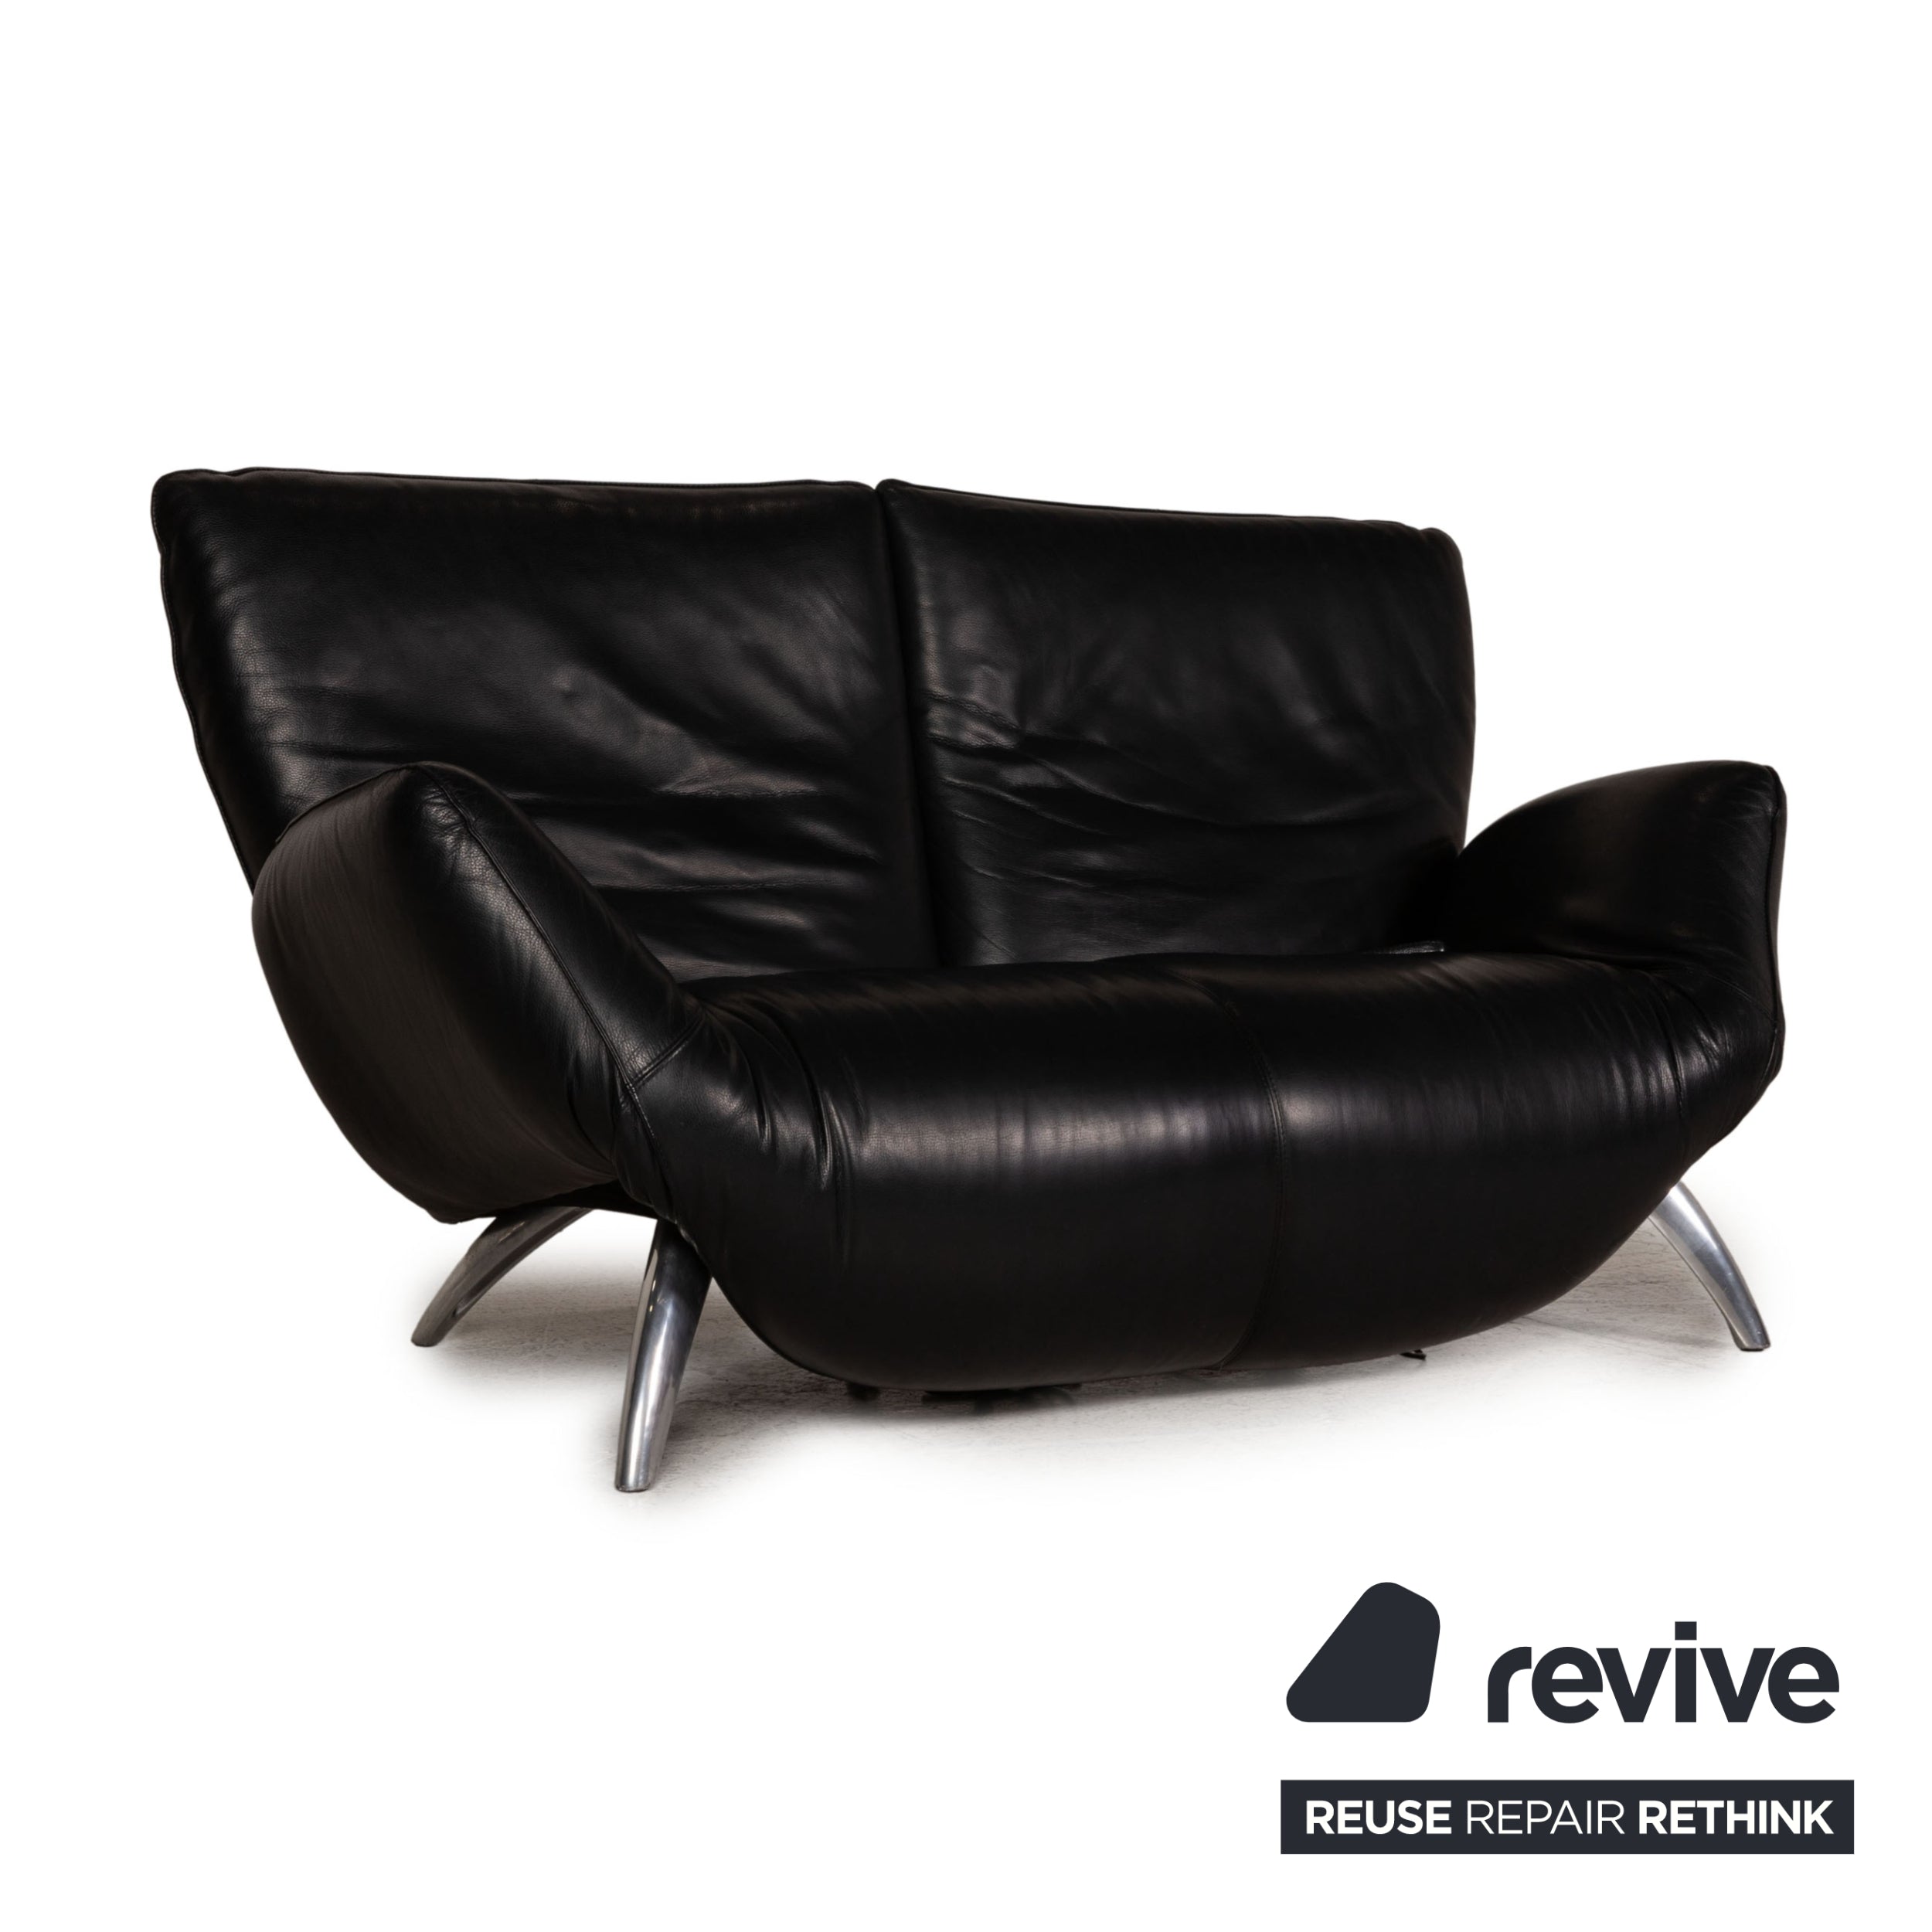 Leolux Panta Rhei leather sofa black two-seater function relax function couch